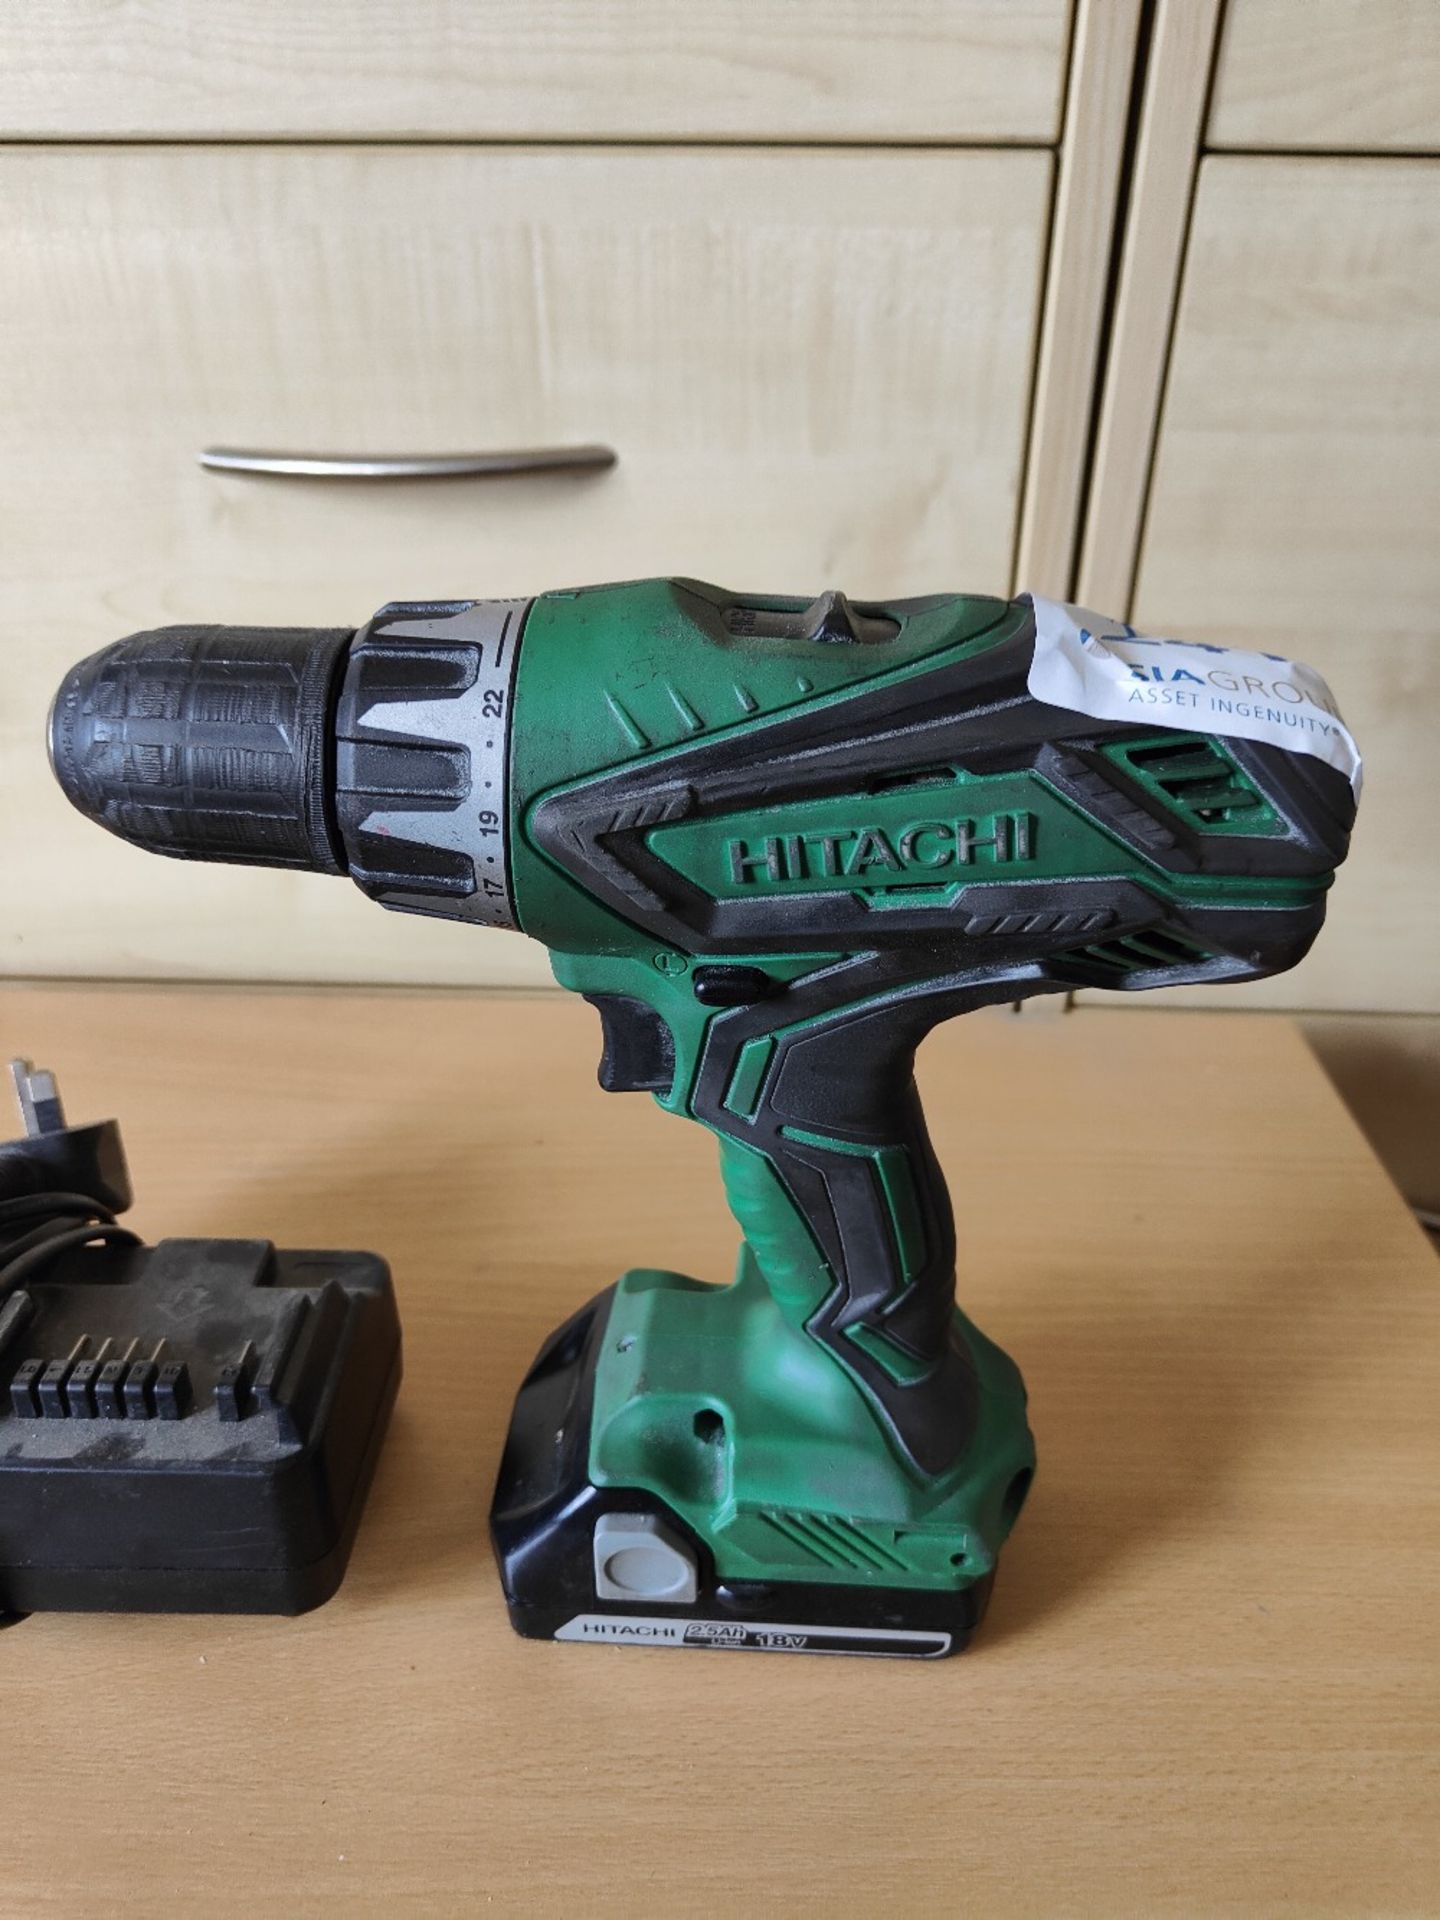 Hitachi cordless drill with battery and charger - Image 2 of 3